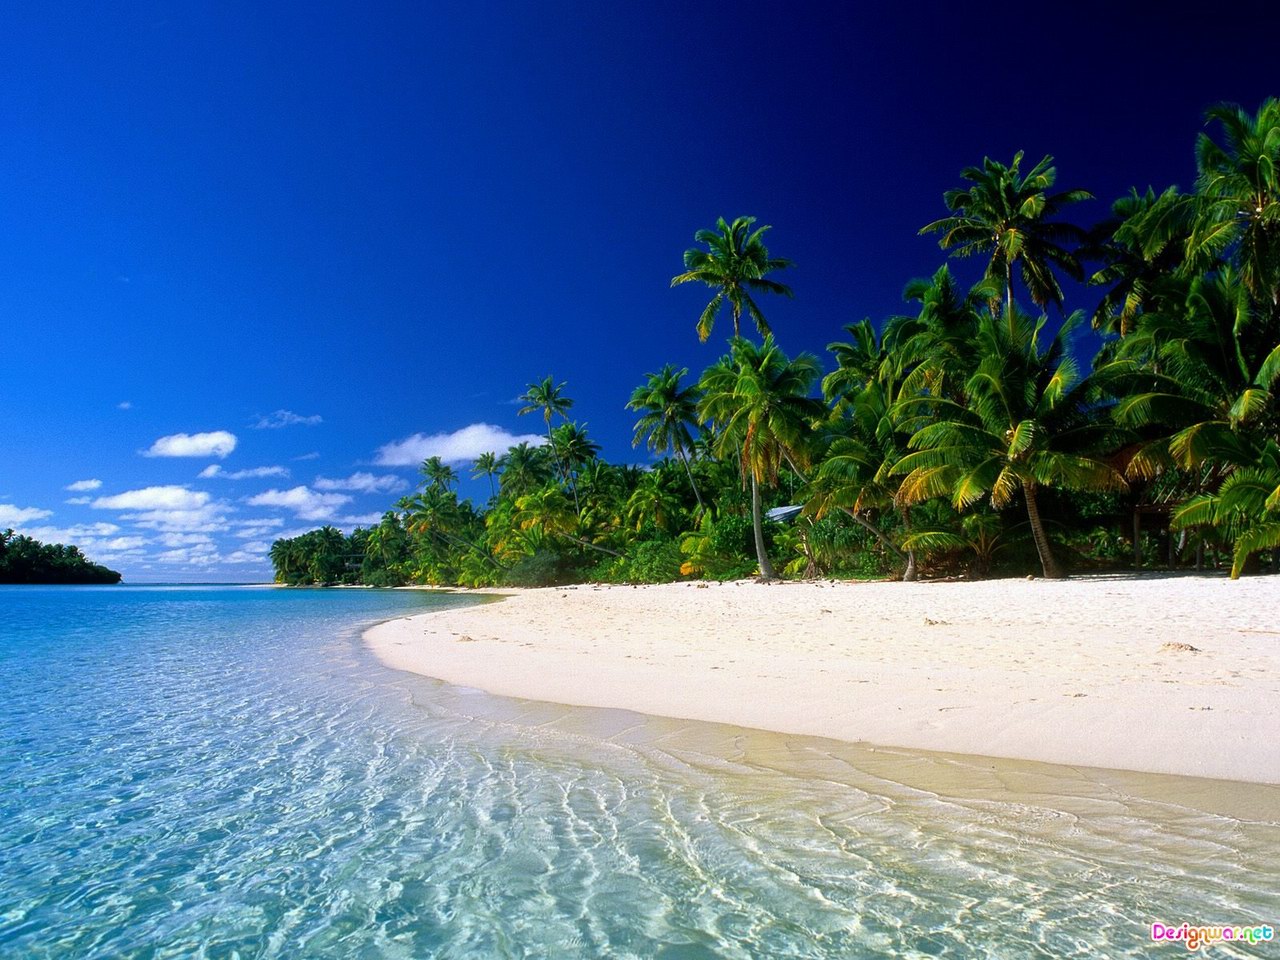 Tropical Beach HD Wallpaper And Make This For Your